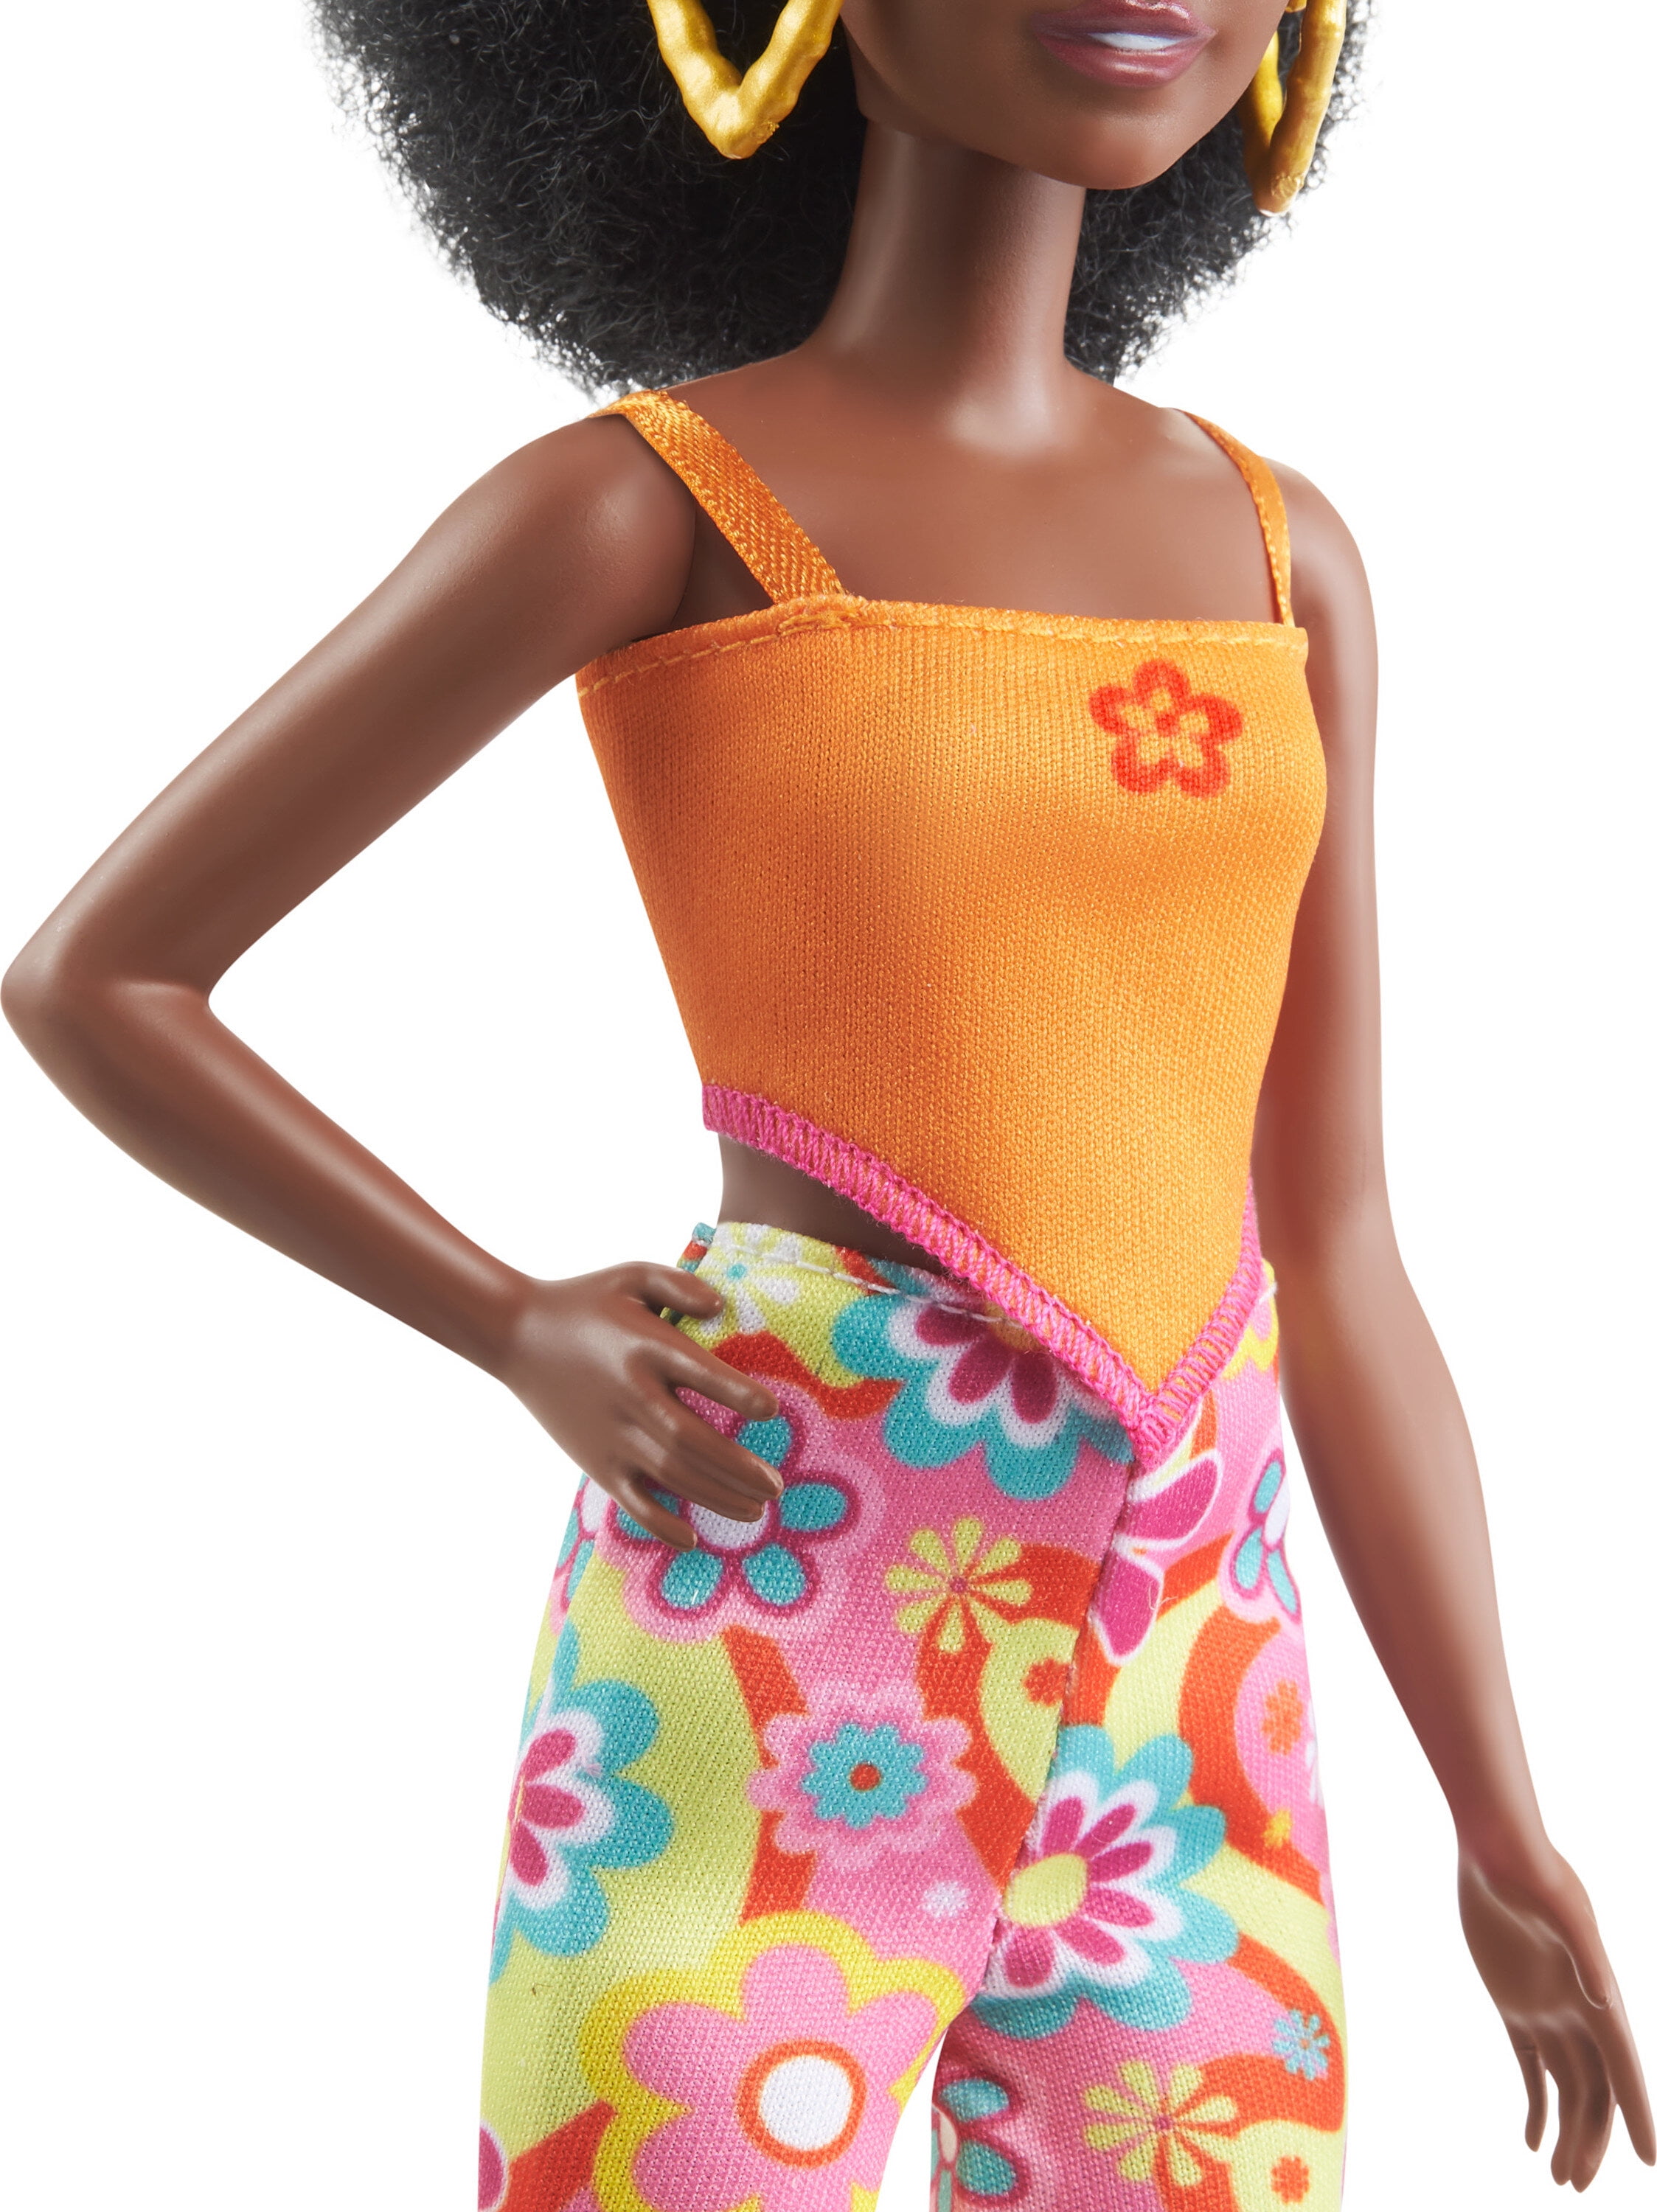 Barbie Doll, Kids Toys, Curly Black Hair and Petite Body Type, Barbie  Fashionistas, Y2K-Style Clothes and Accessories, Dolls -  Canada